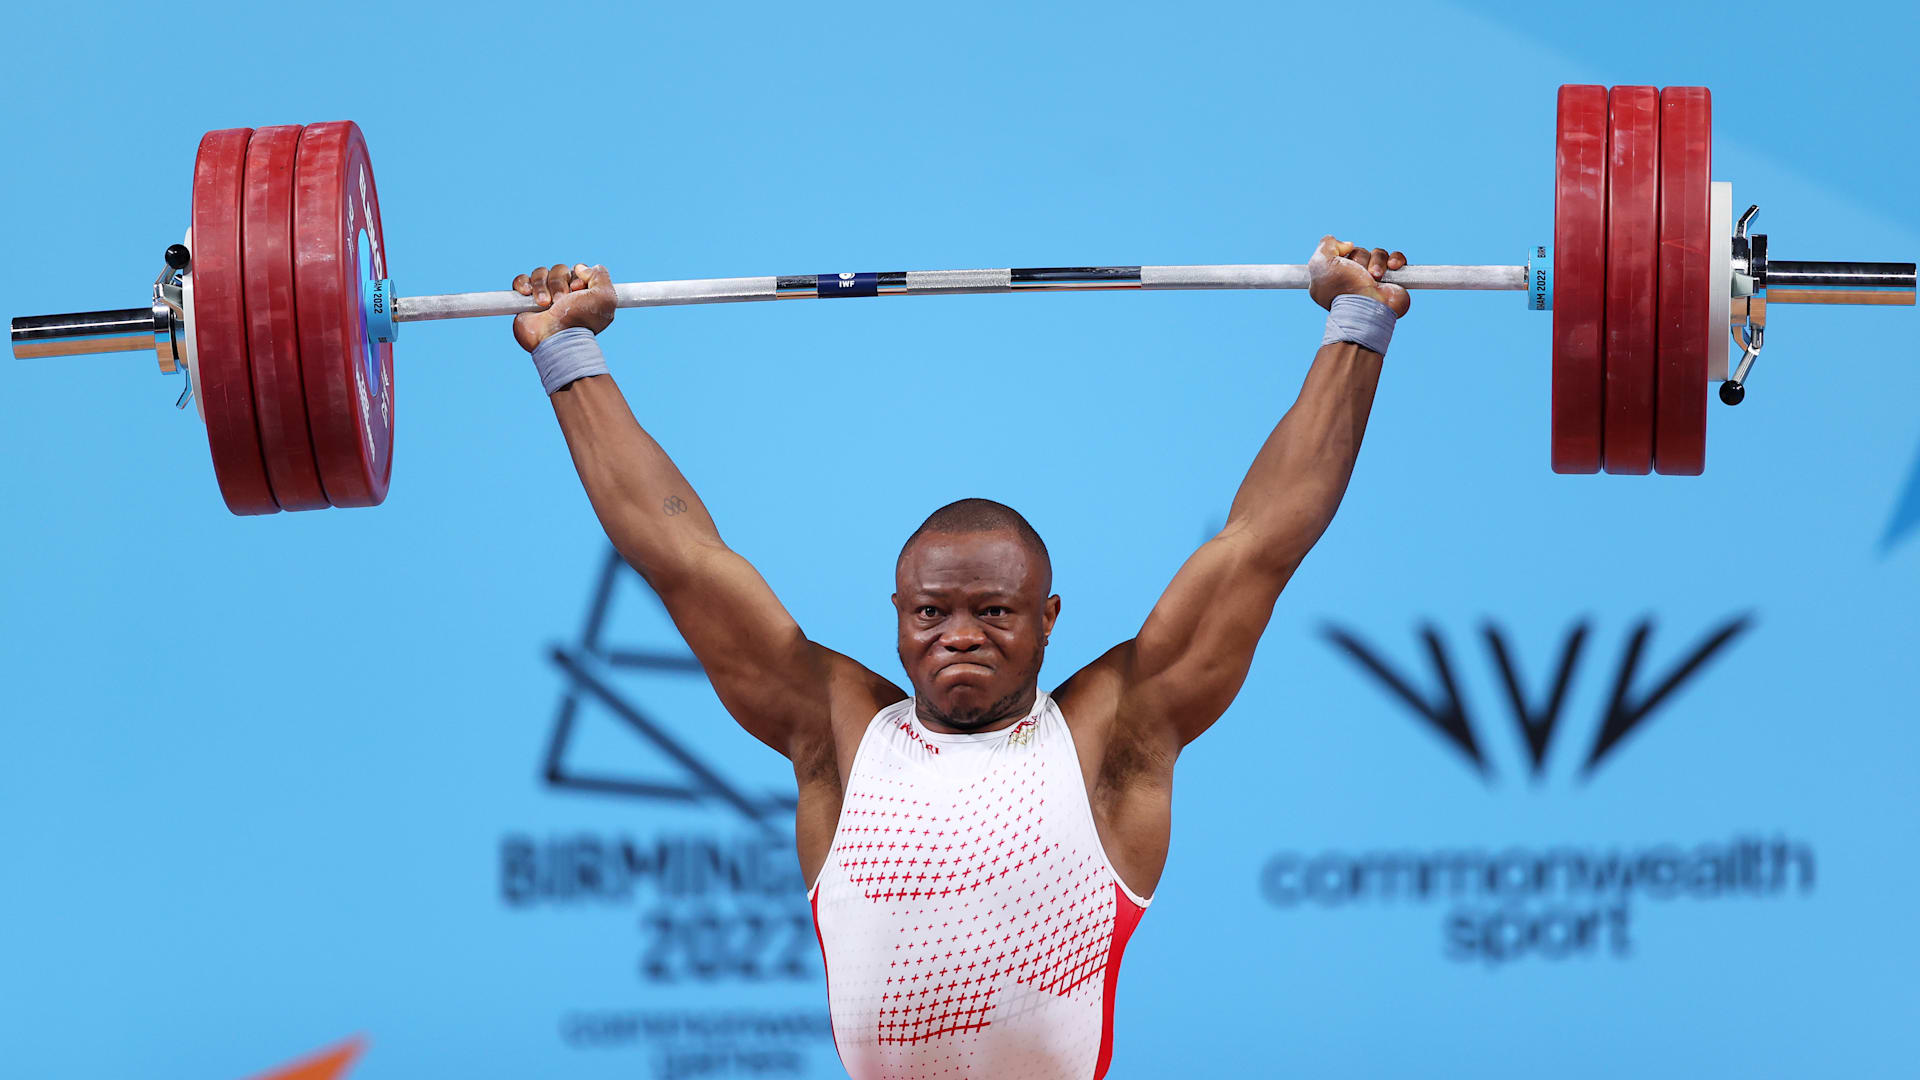 Refugee Olympian Cyrille Tchatchet The English weightlifter suffers medal heartbreak at 2022 Commonwealth Games